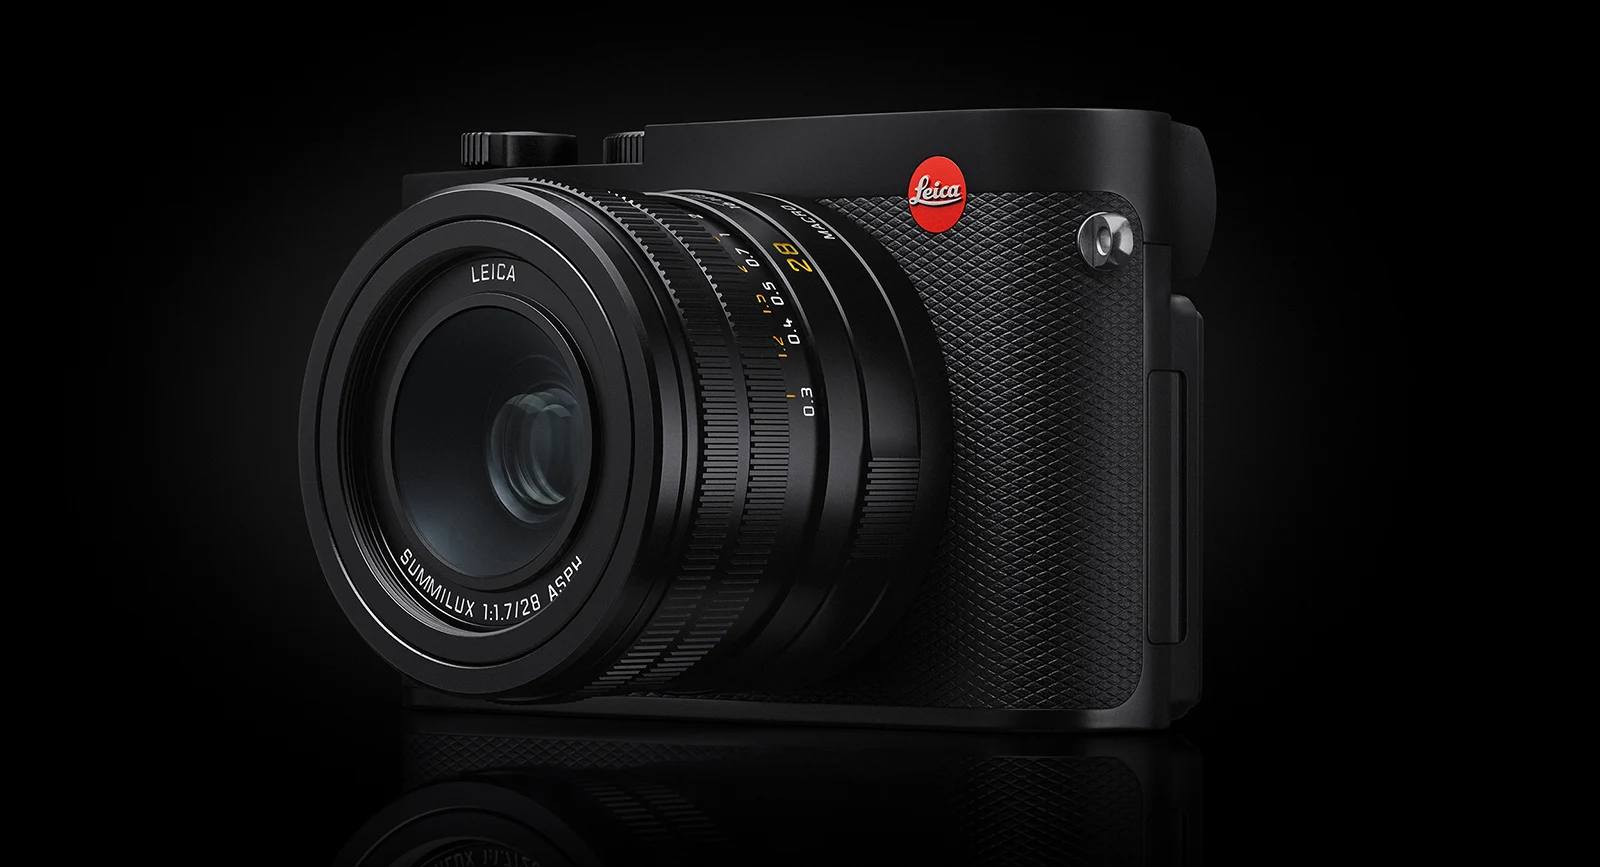 Watches, Stories, & Gear: Leica’s Q Series Takes a Leap Forward with Newly Released Q3, Designing the Next Timepiece for the U.K. National Rail Network & a Couple of Intriguing Announcements from the Playstation Showcase